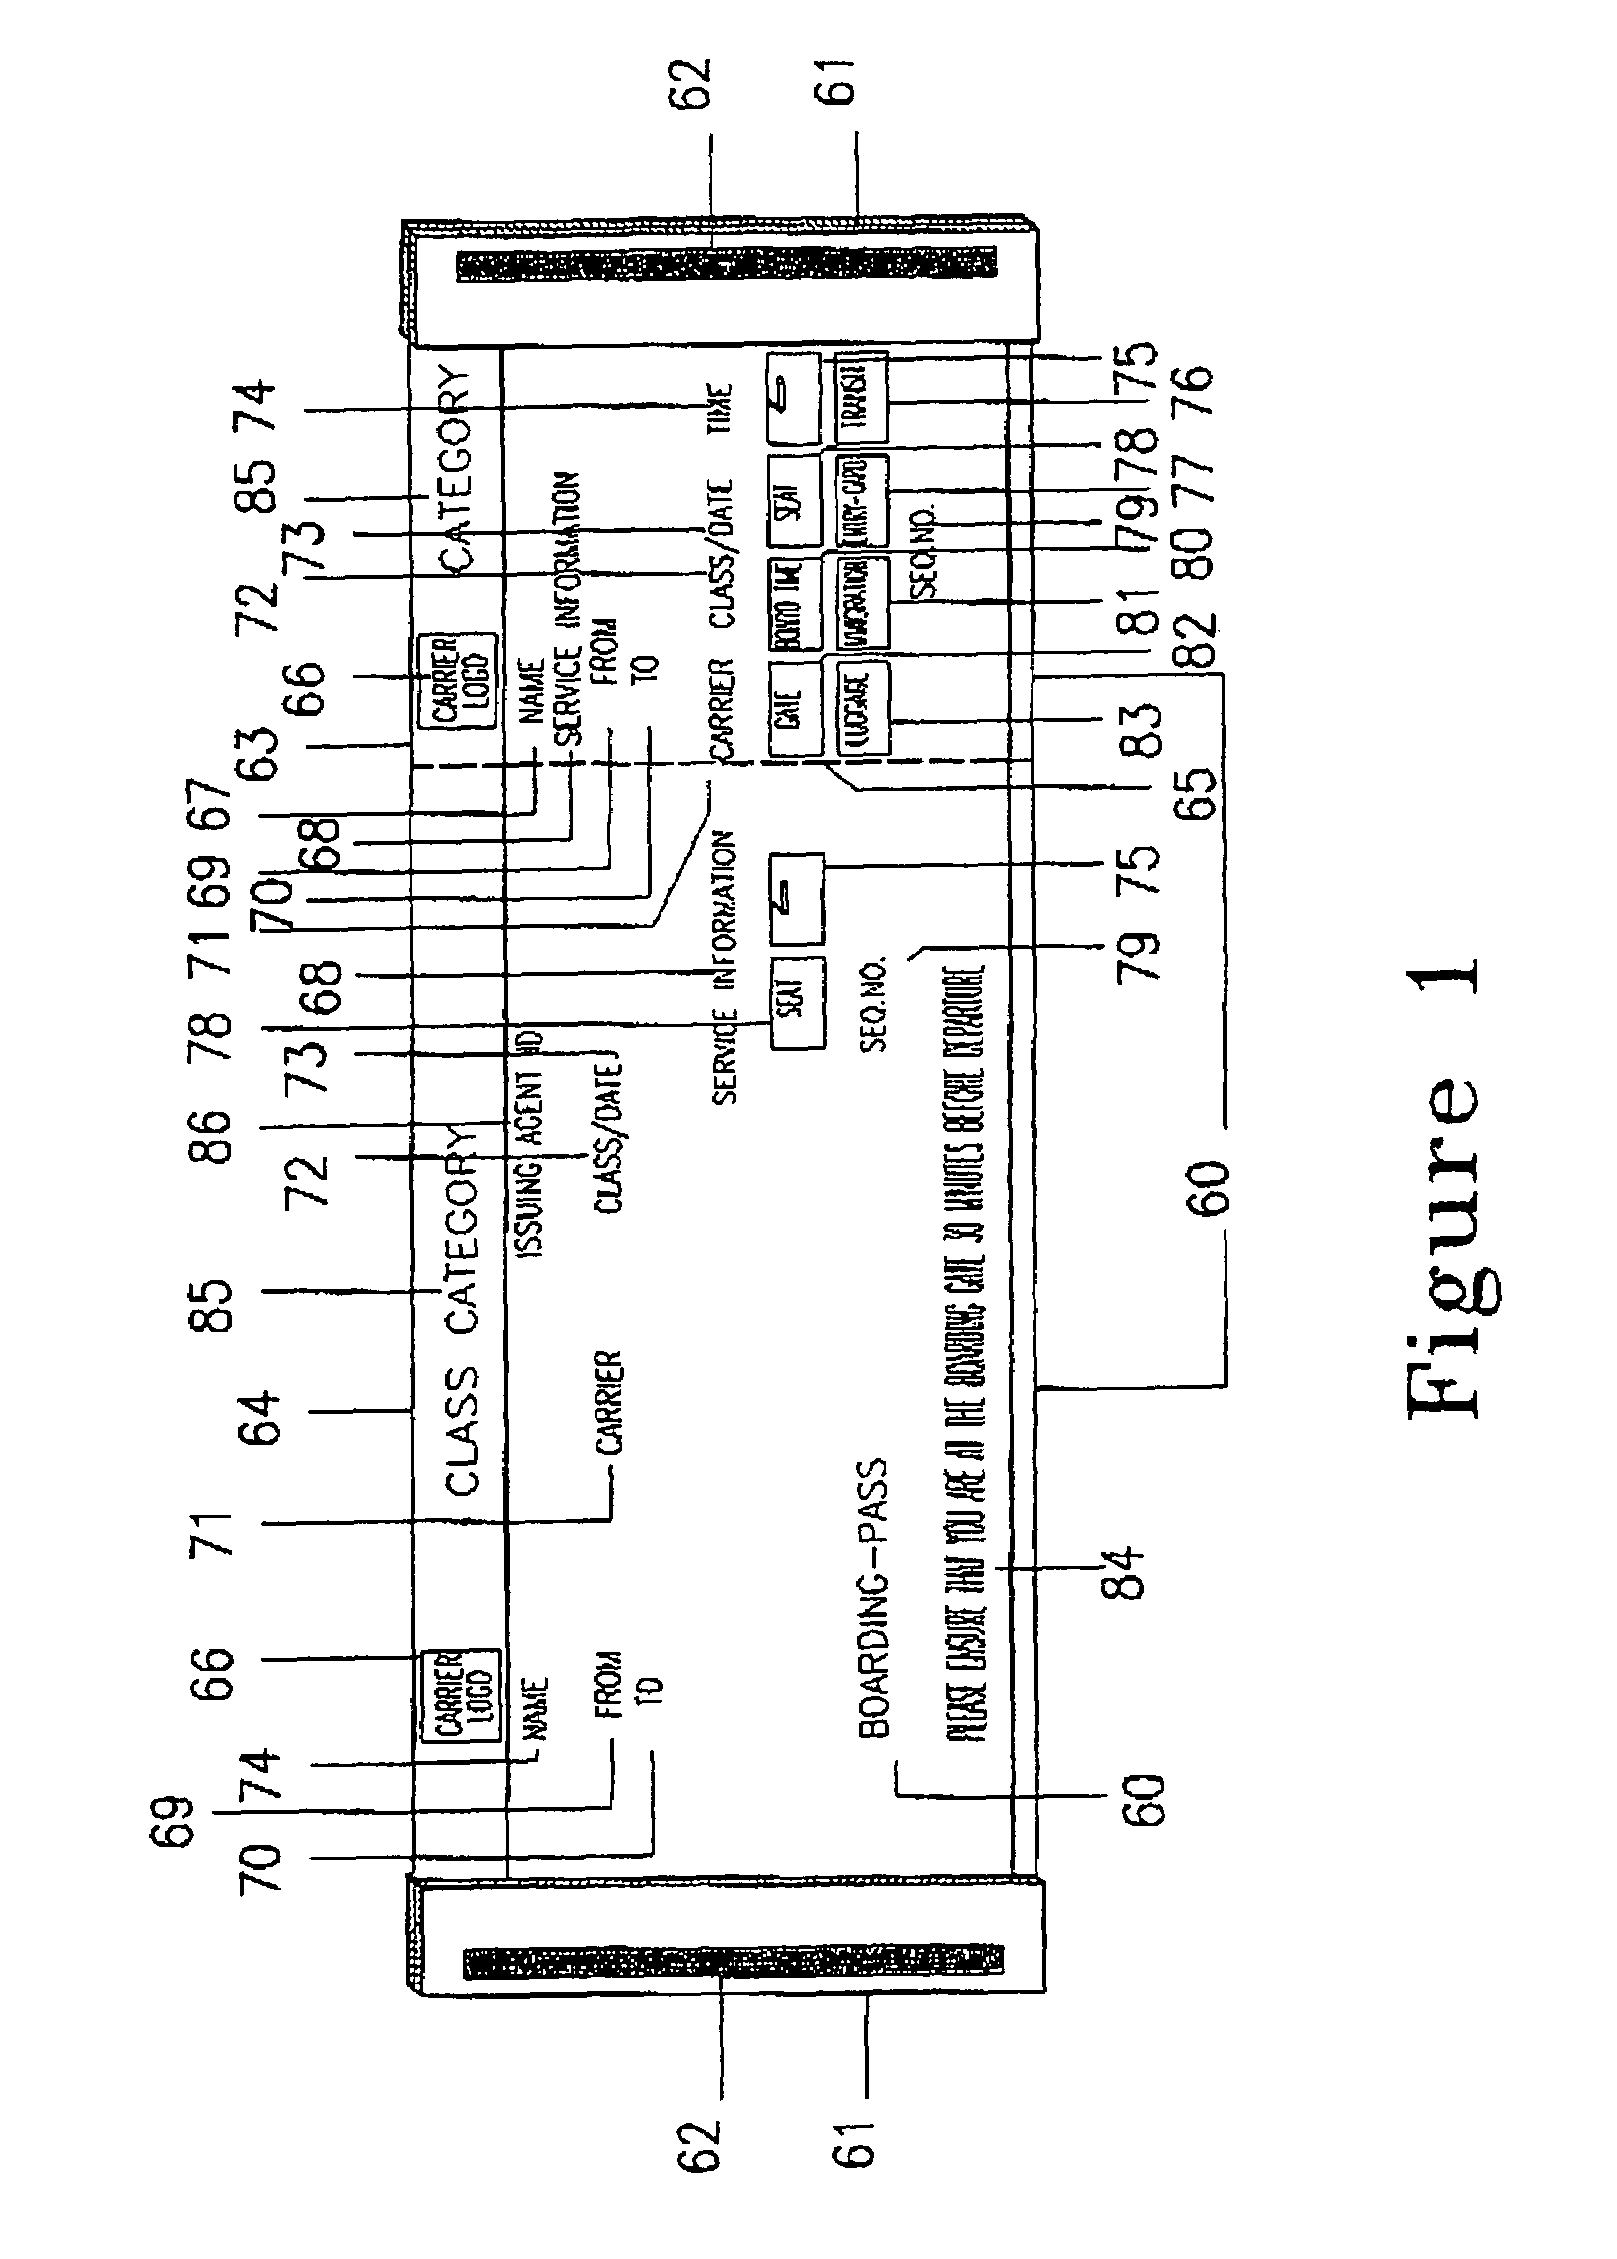 Boarding passes with encoded data and systems for issuing and processing them